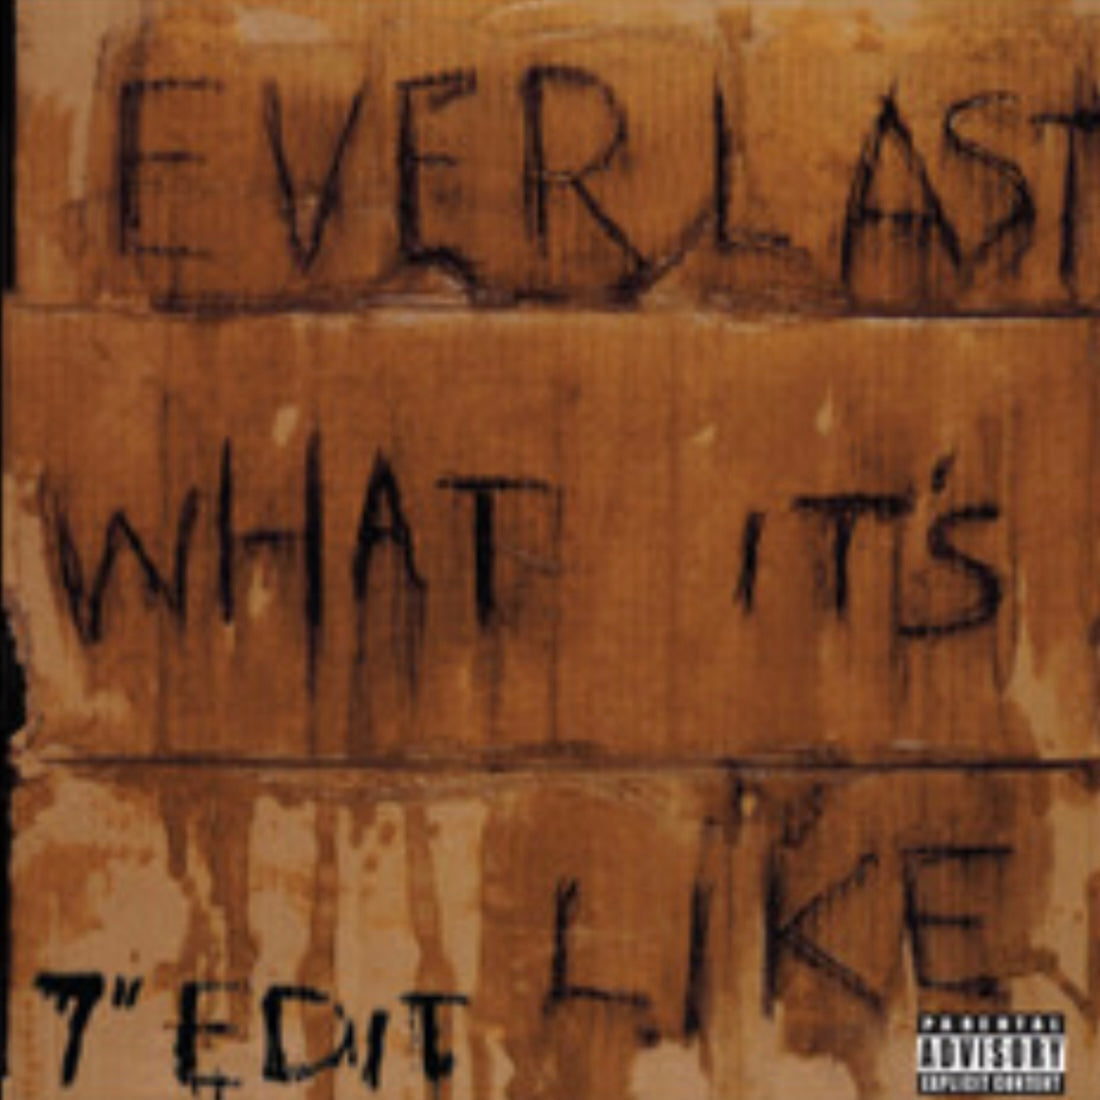 Everlast - What It's Like b/w Ends